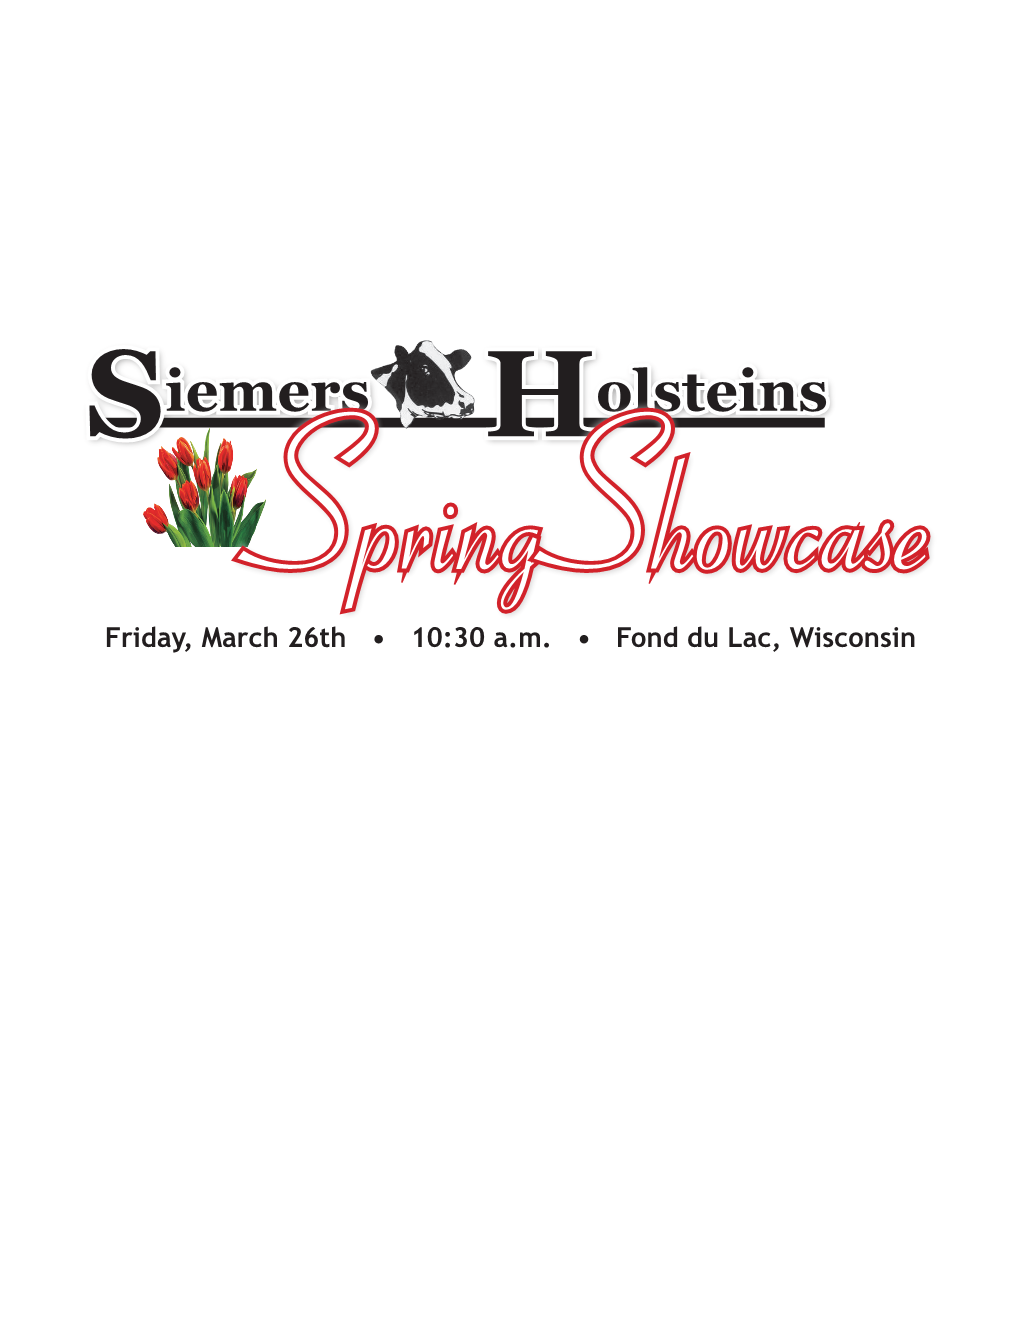 Siemers Holsteins Springshowcase Friday, March 26Th • 10:30 A.M